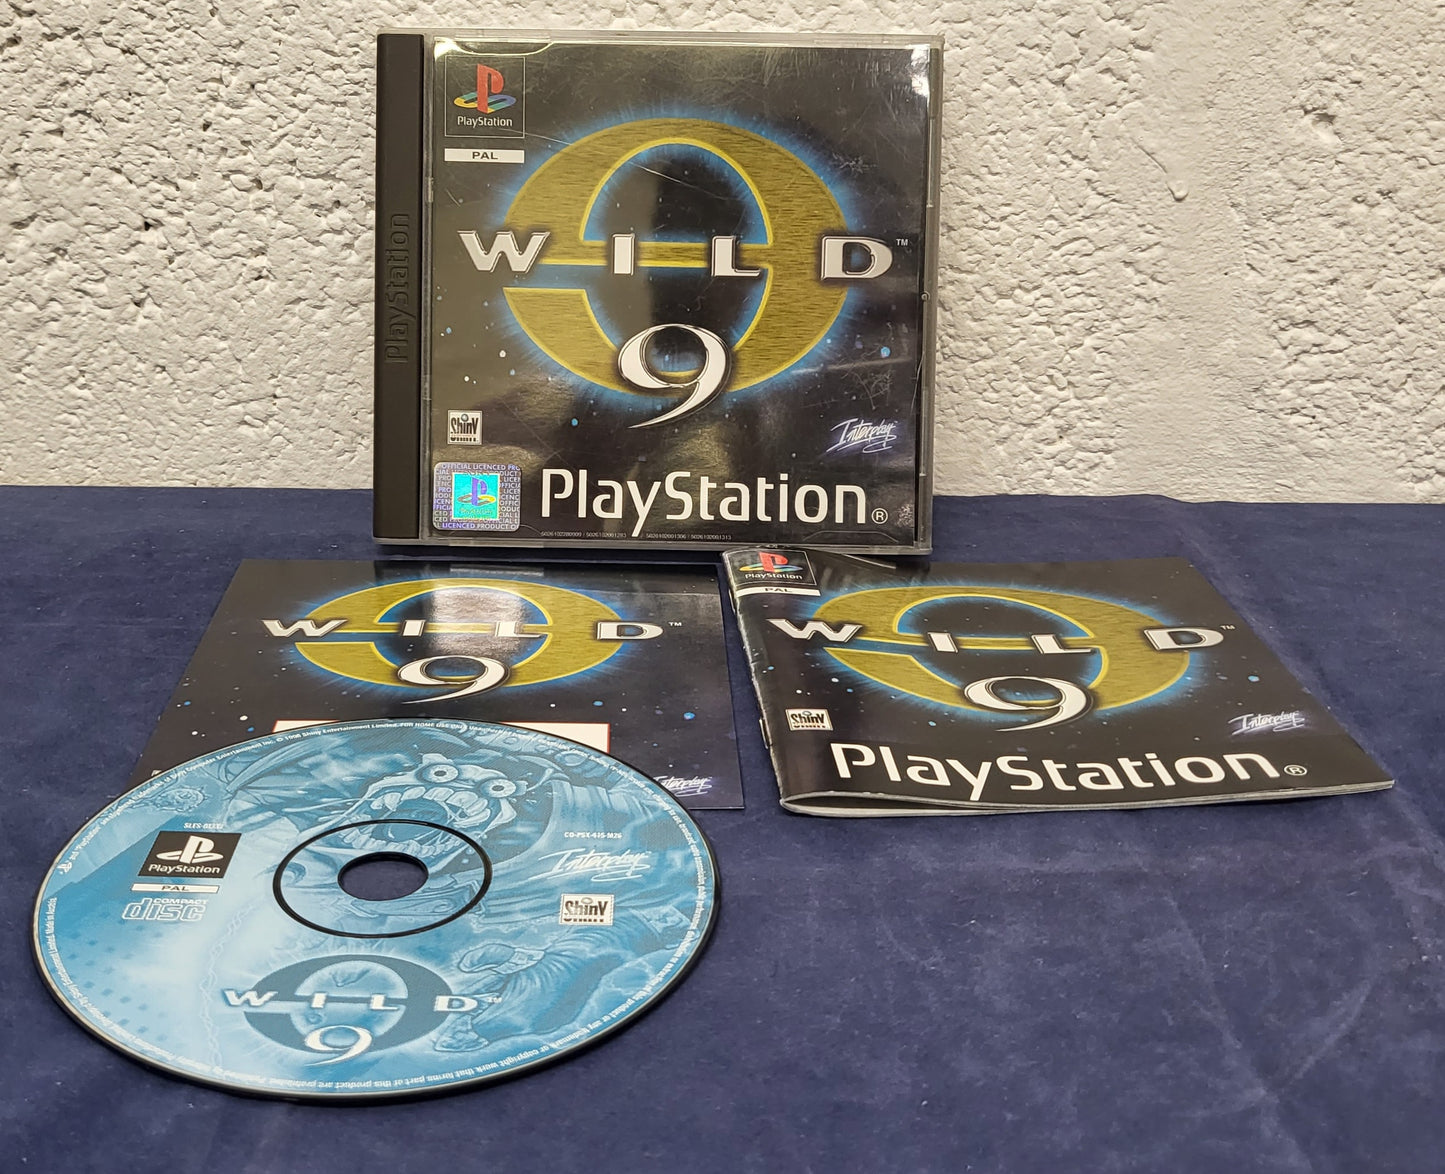 Wild 9 Sony Playstation 1 (PS1) Game